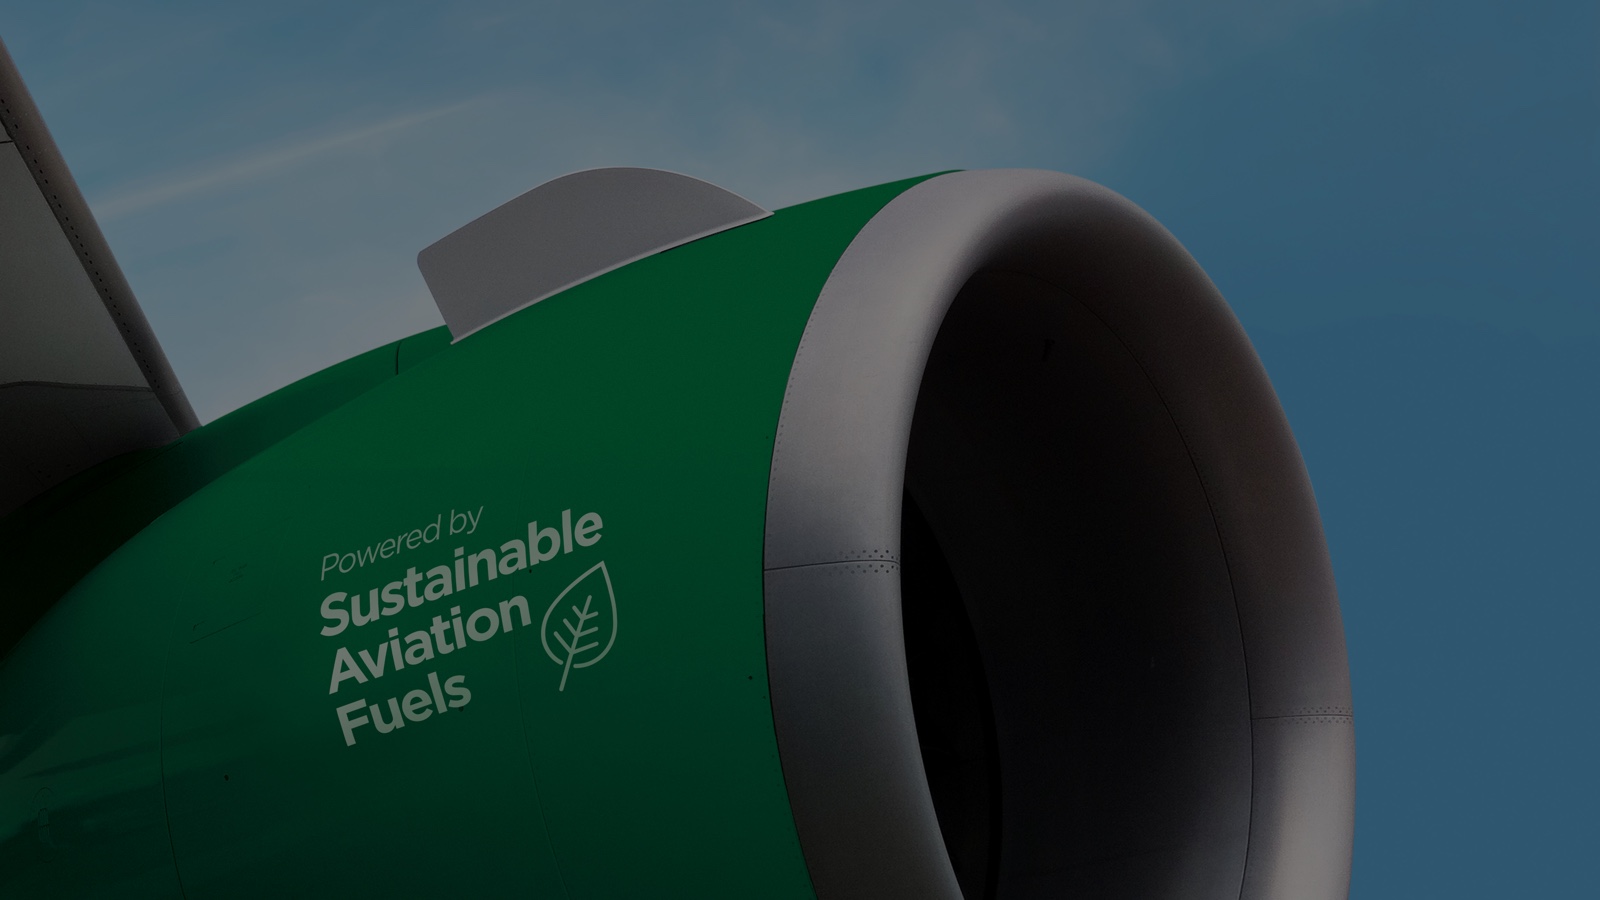 UK Sustainable Aviation Fuel Clearing House Delivery Partner briefing